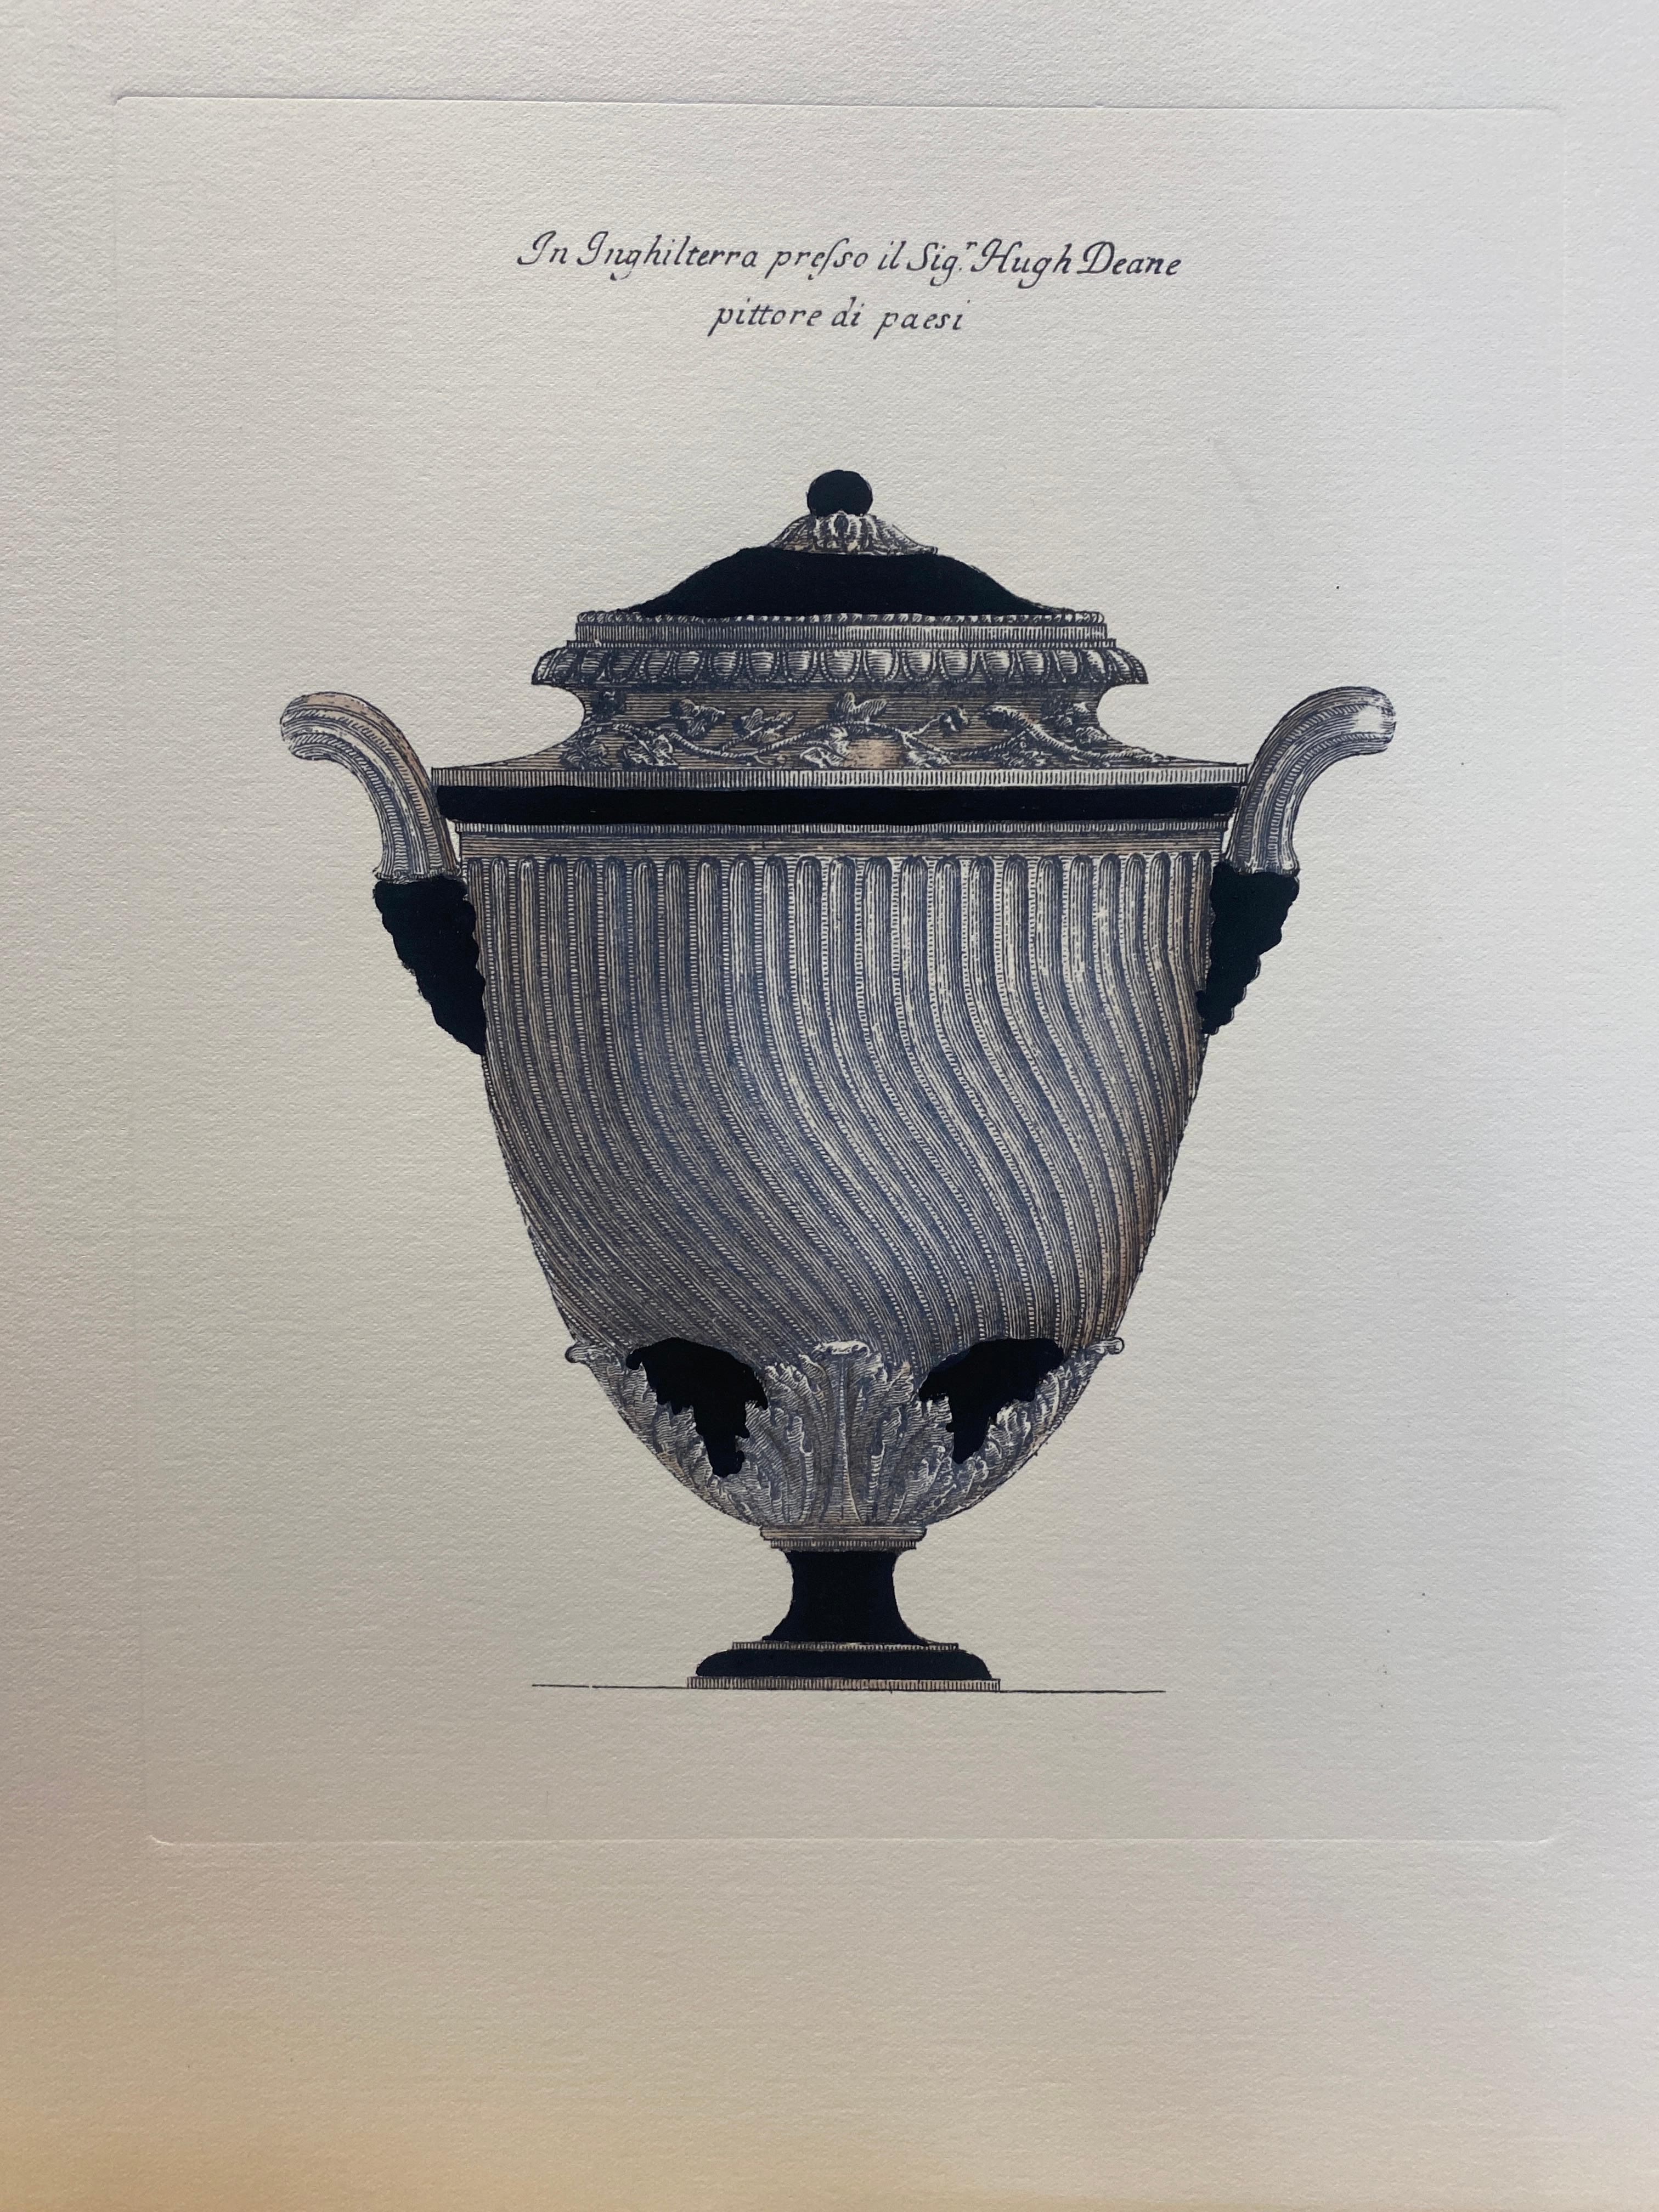 Very original reproductions of decorative vases from important English mansions, printed on a hand press on 100% cotton engraving paper.
Completely handpainted with a cream wash, umber highlights, and matte black details.

Available in five